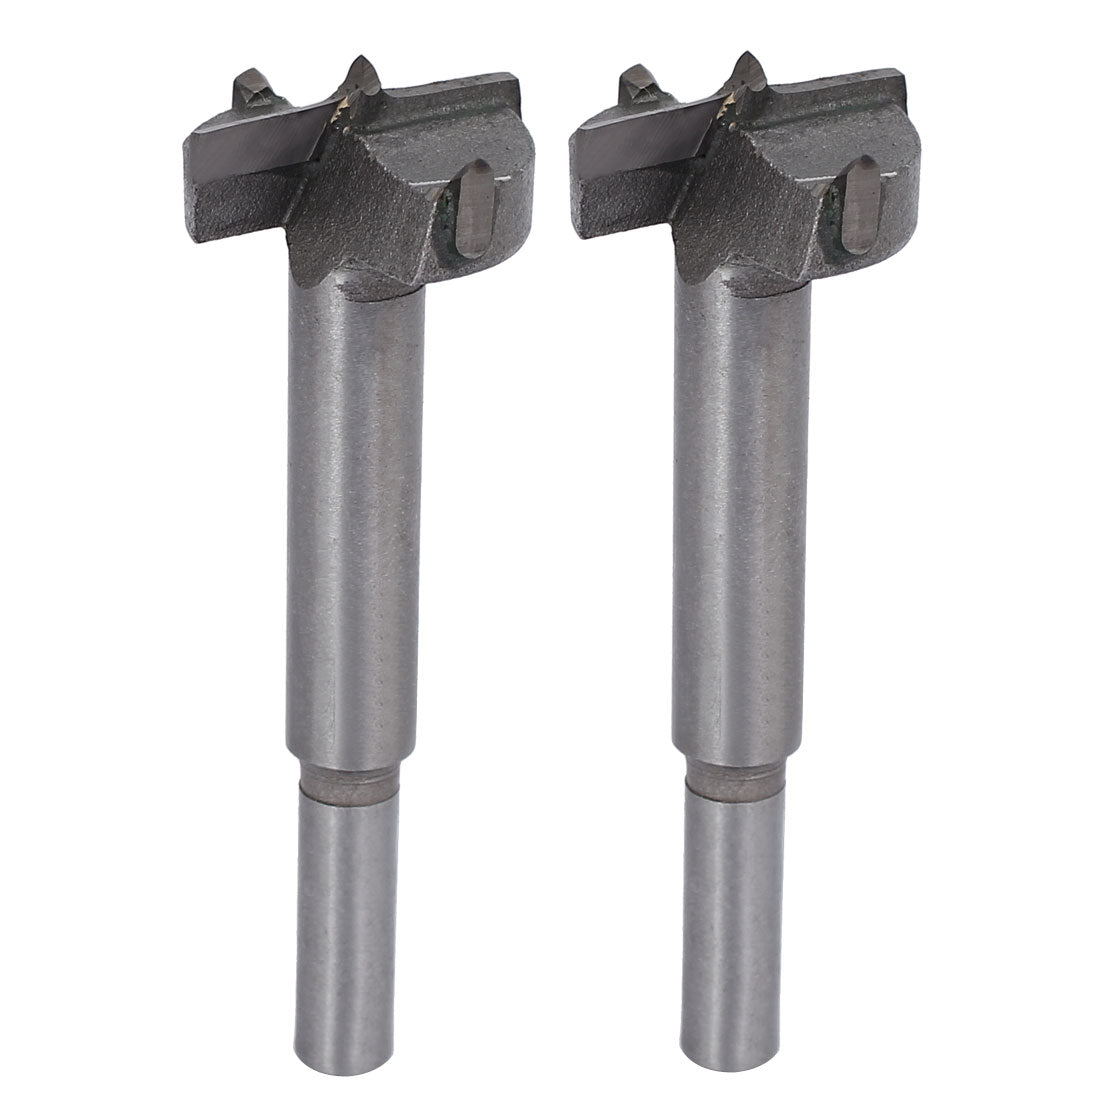 uxcell Uxcell 27mm Dia Carbide Tip Round Shank Wood Cutting Hole Saw Hinge Boring Bit 2pcs